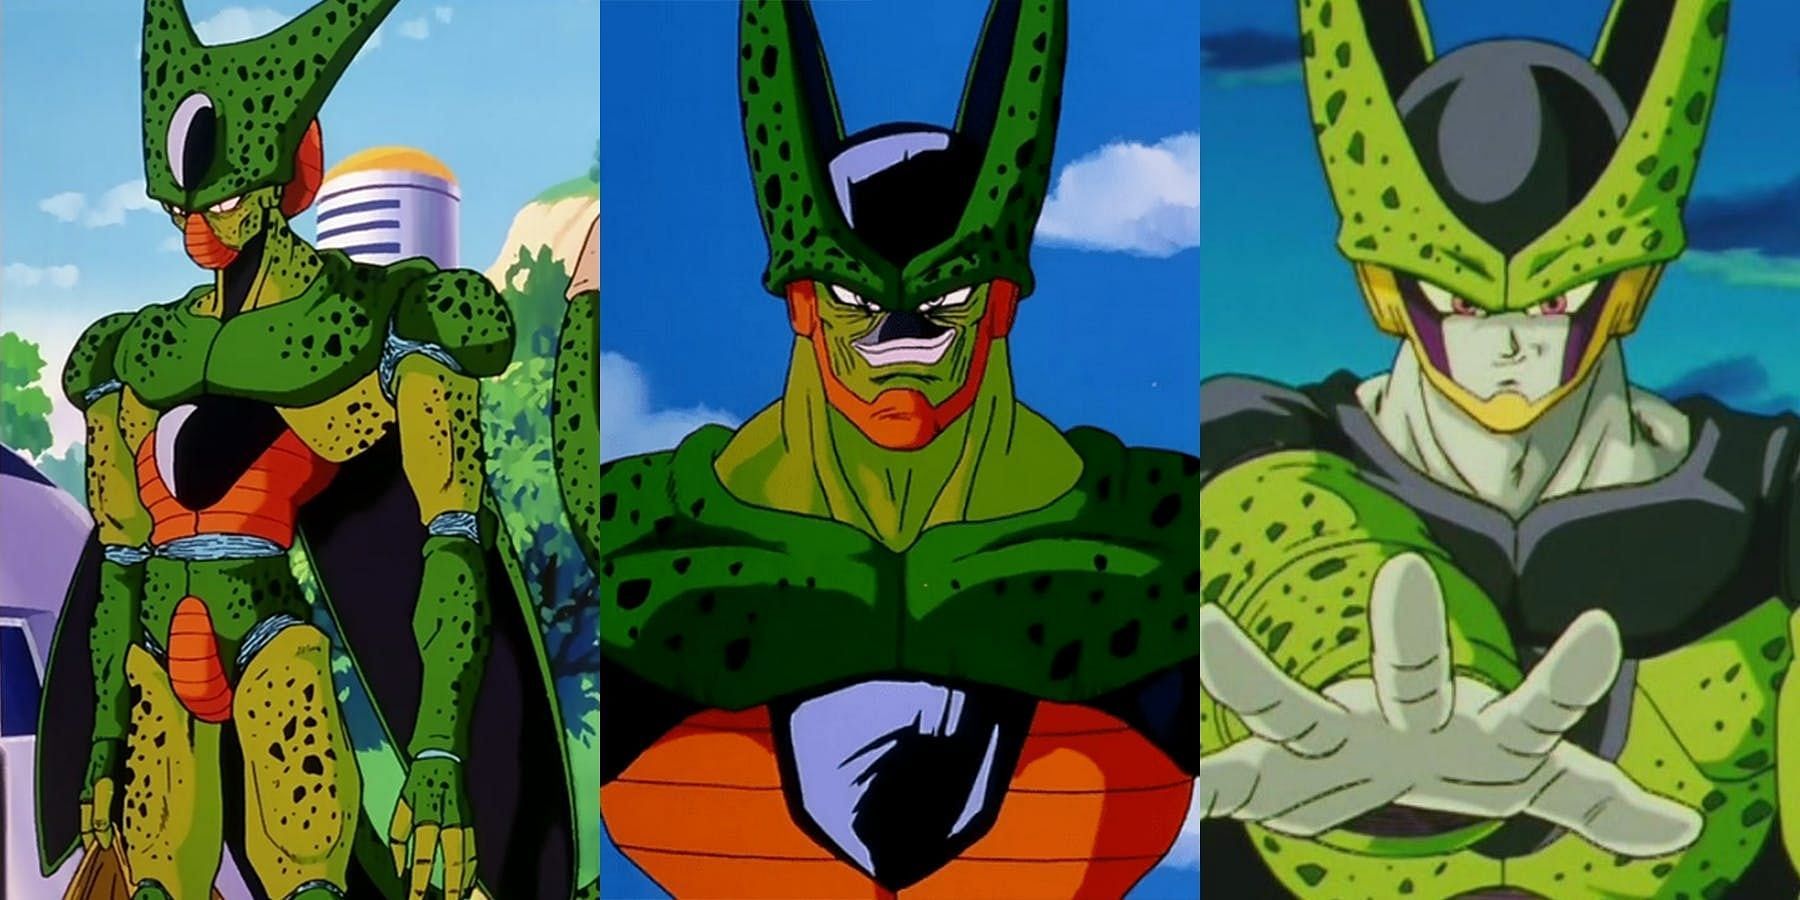 The various forms of Cell as seen in the Dragon Ball Z anime (Image via Toei Animation)